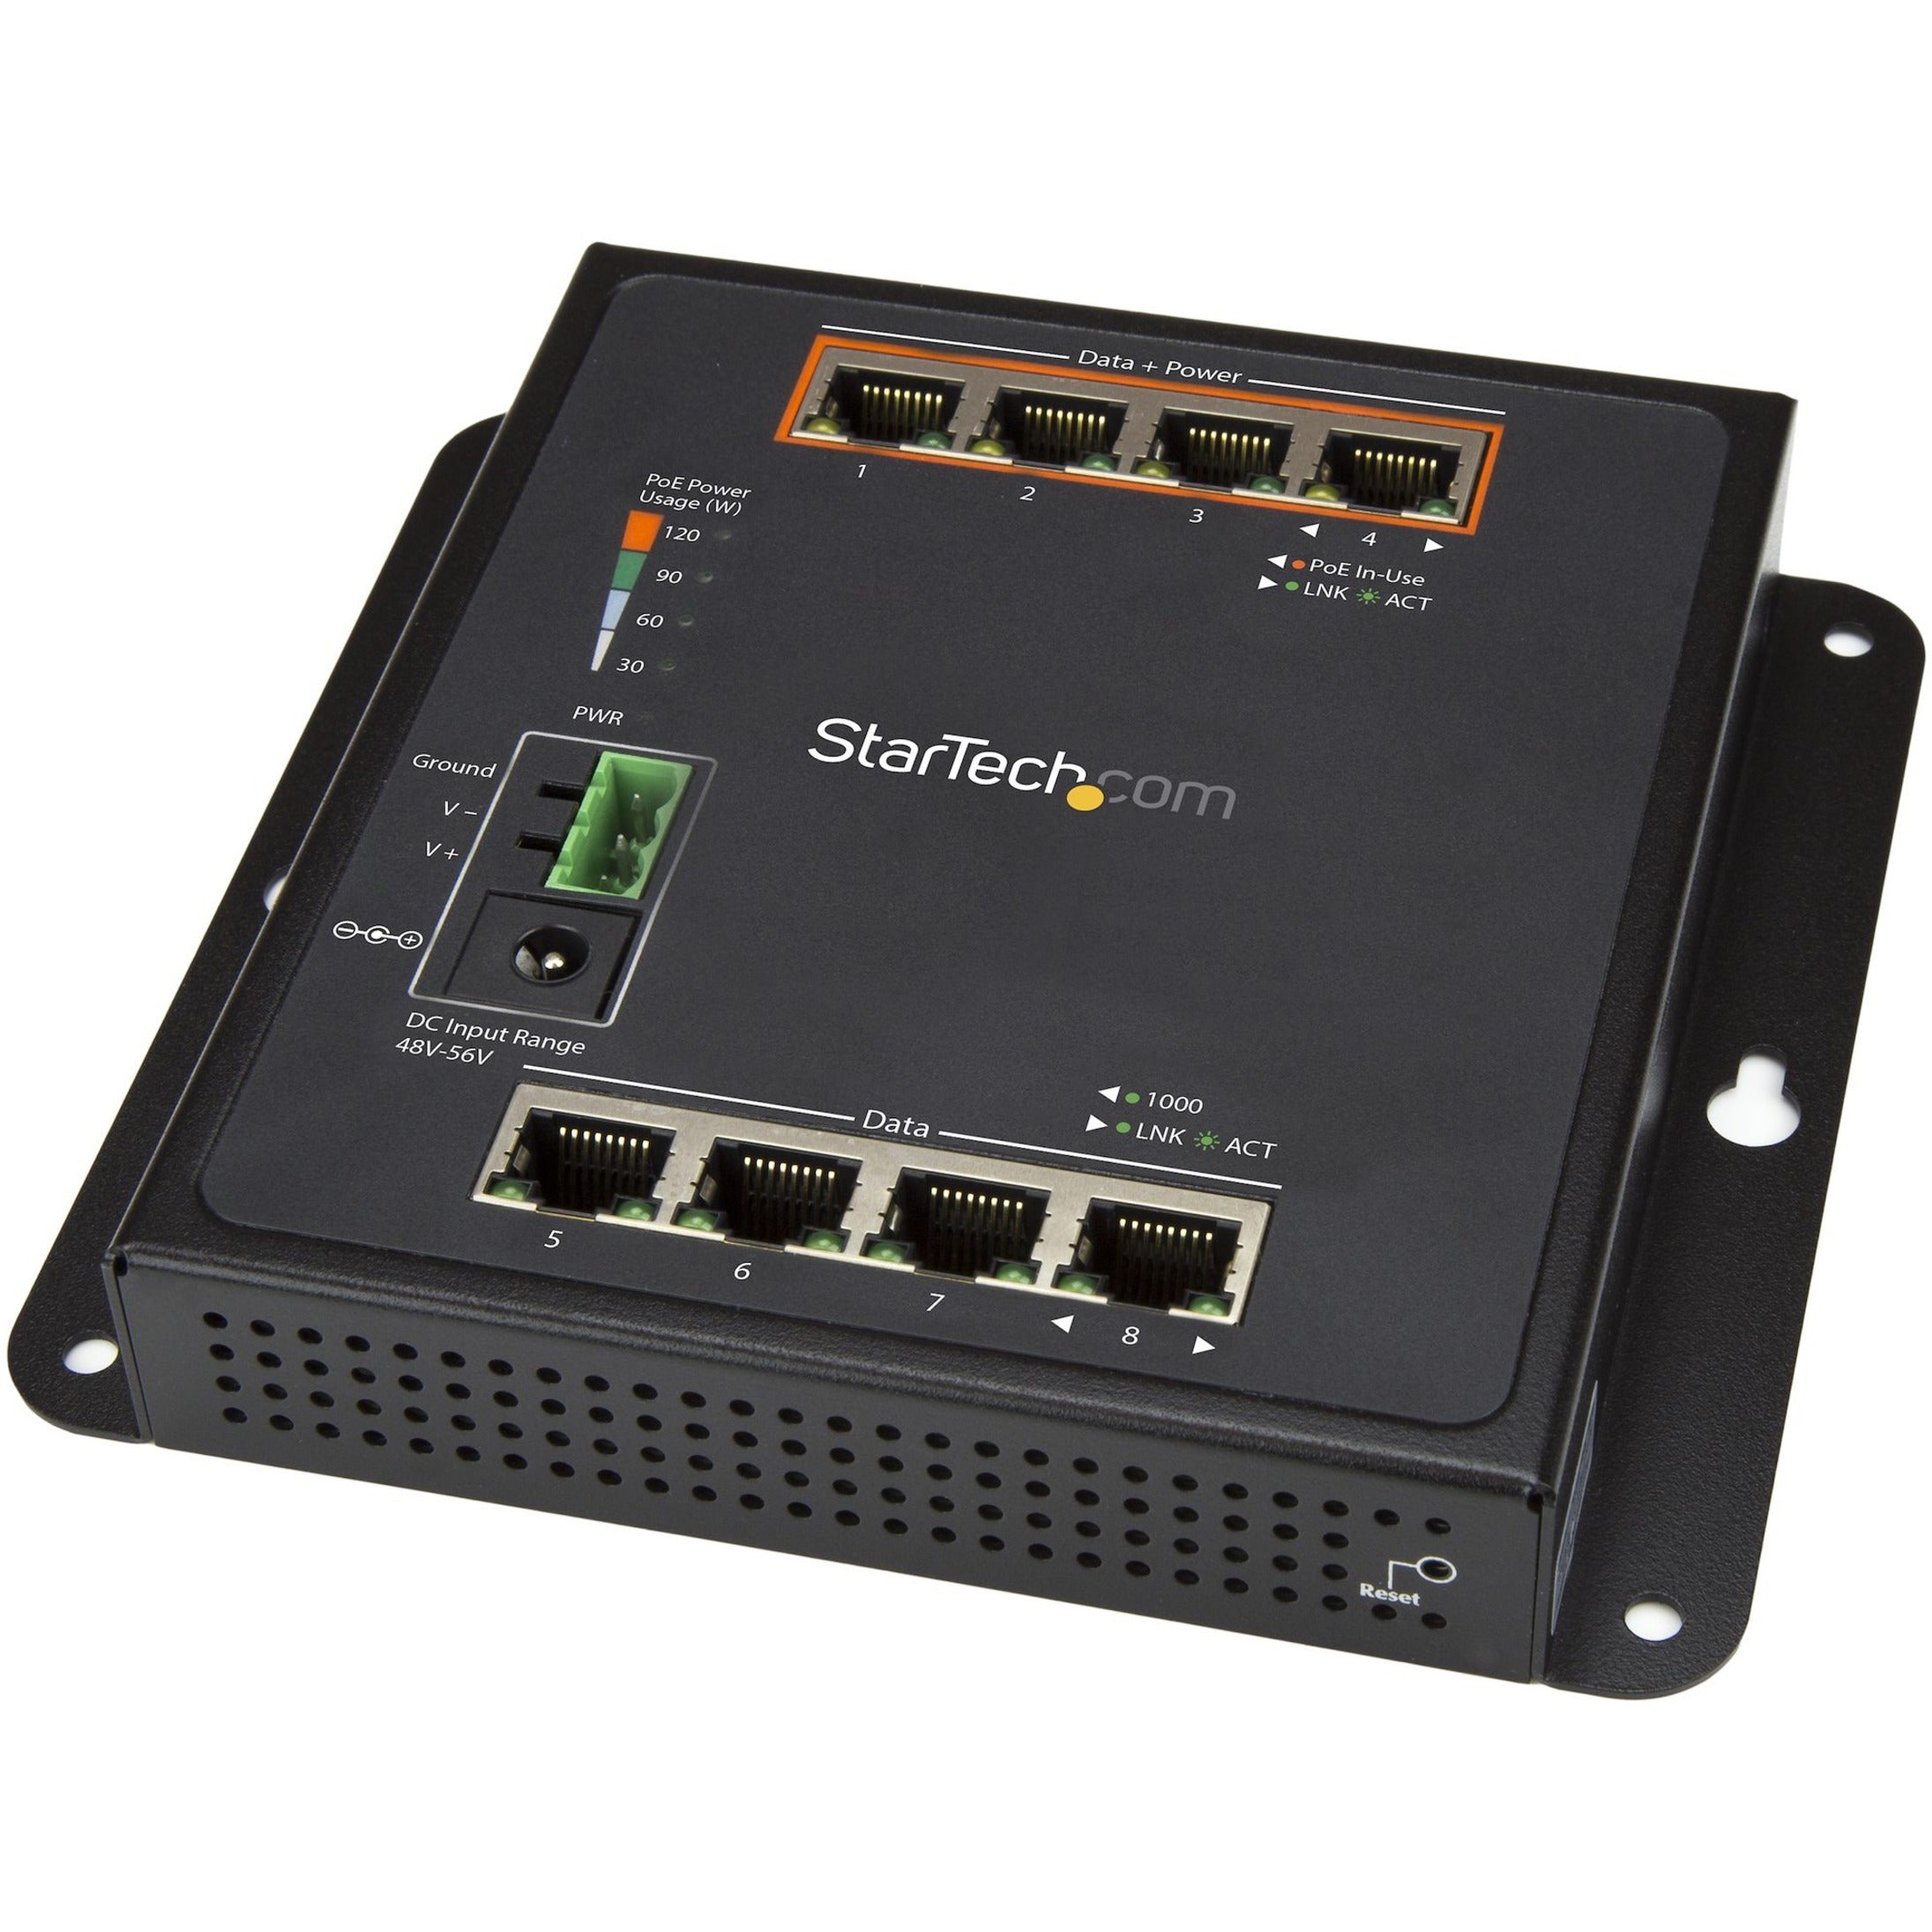 StarTech.com IES81GPOEW 8-Port (4 PoE+) Gigabit Ethernet Switch - Managed - Wall Mount with Front Access, Industrial Network Switch